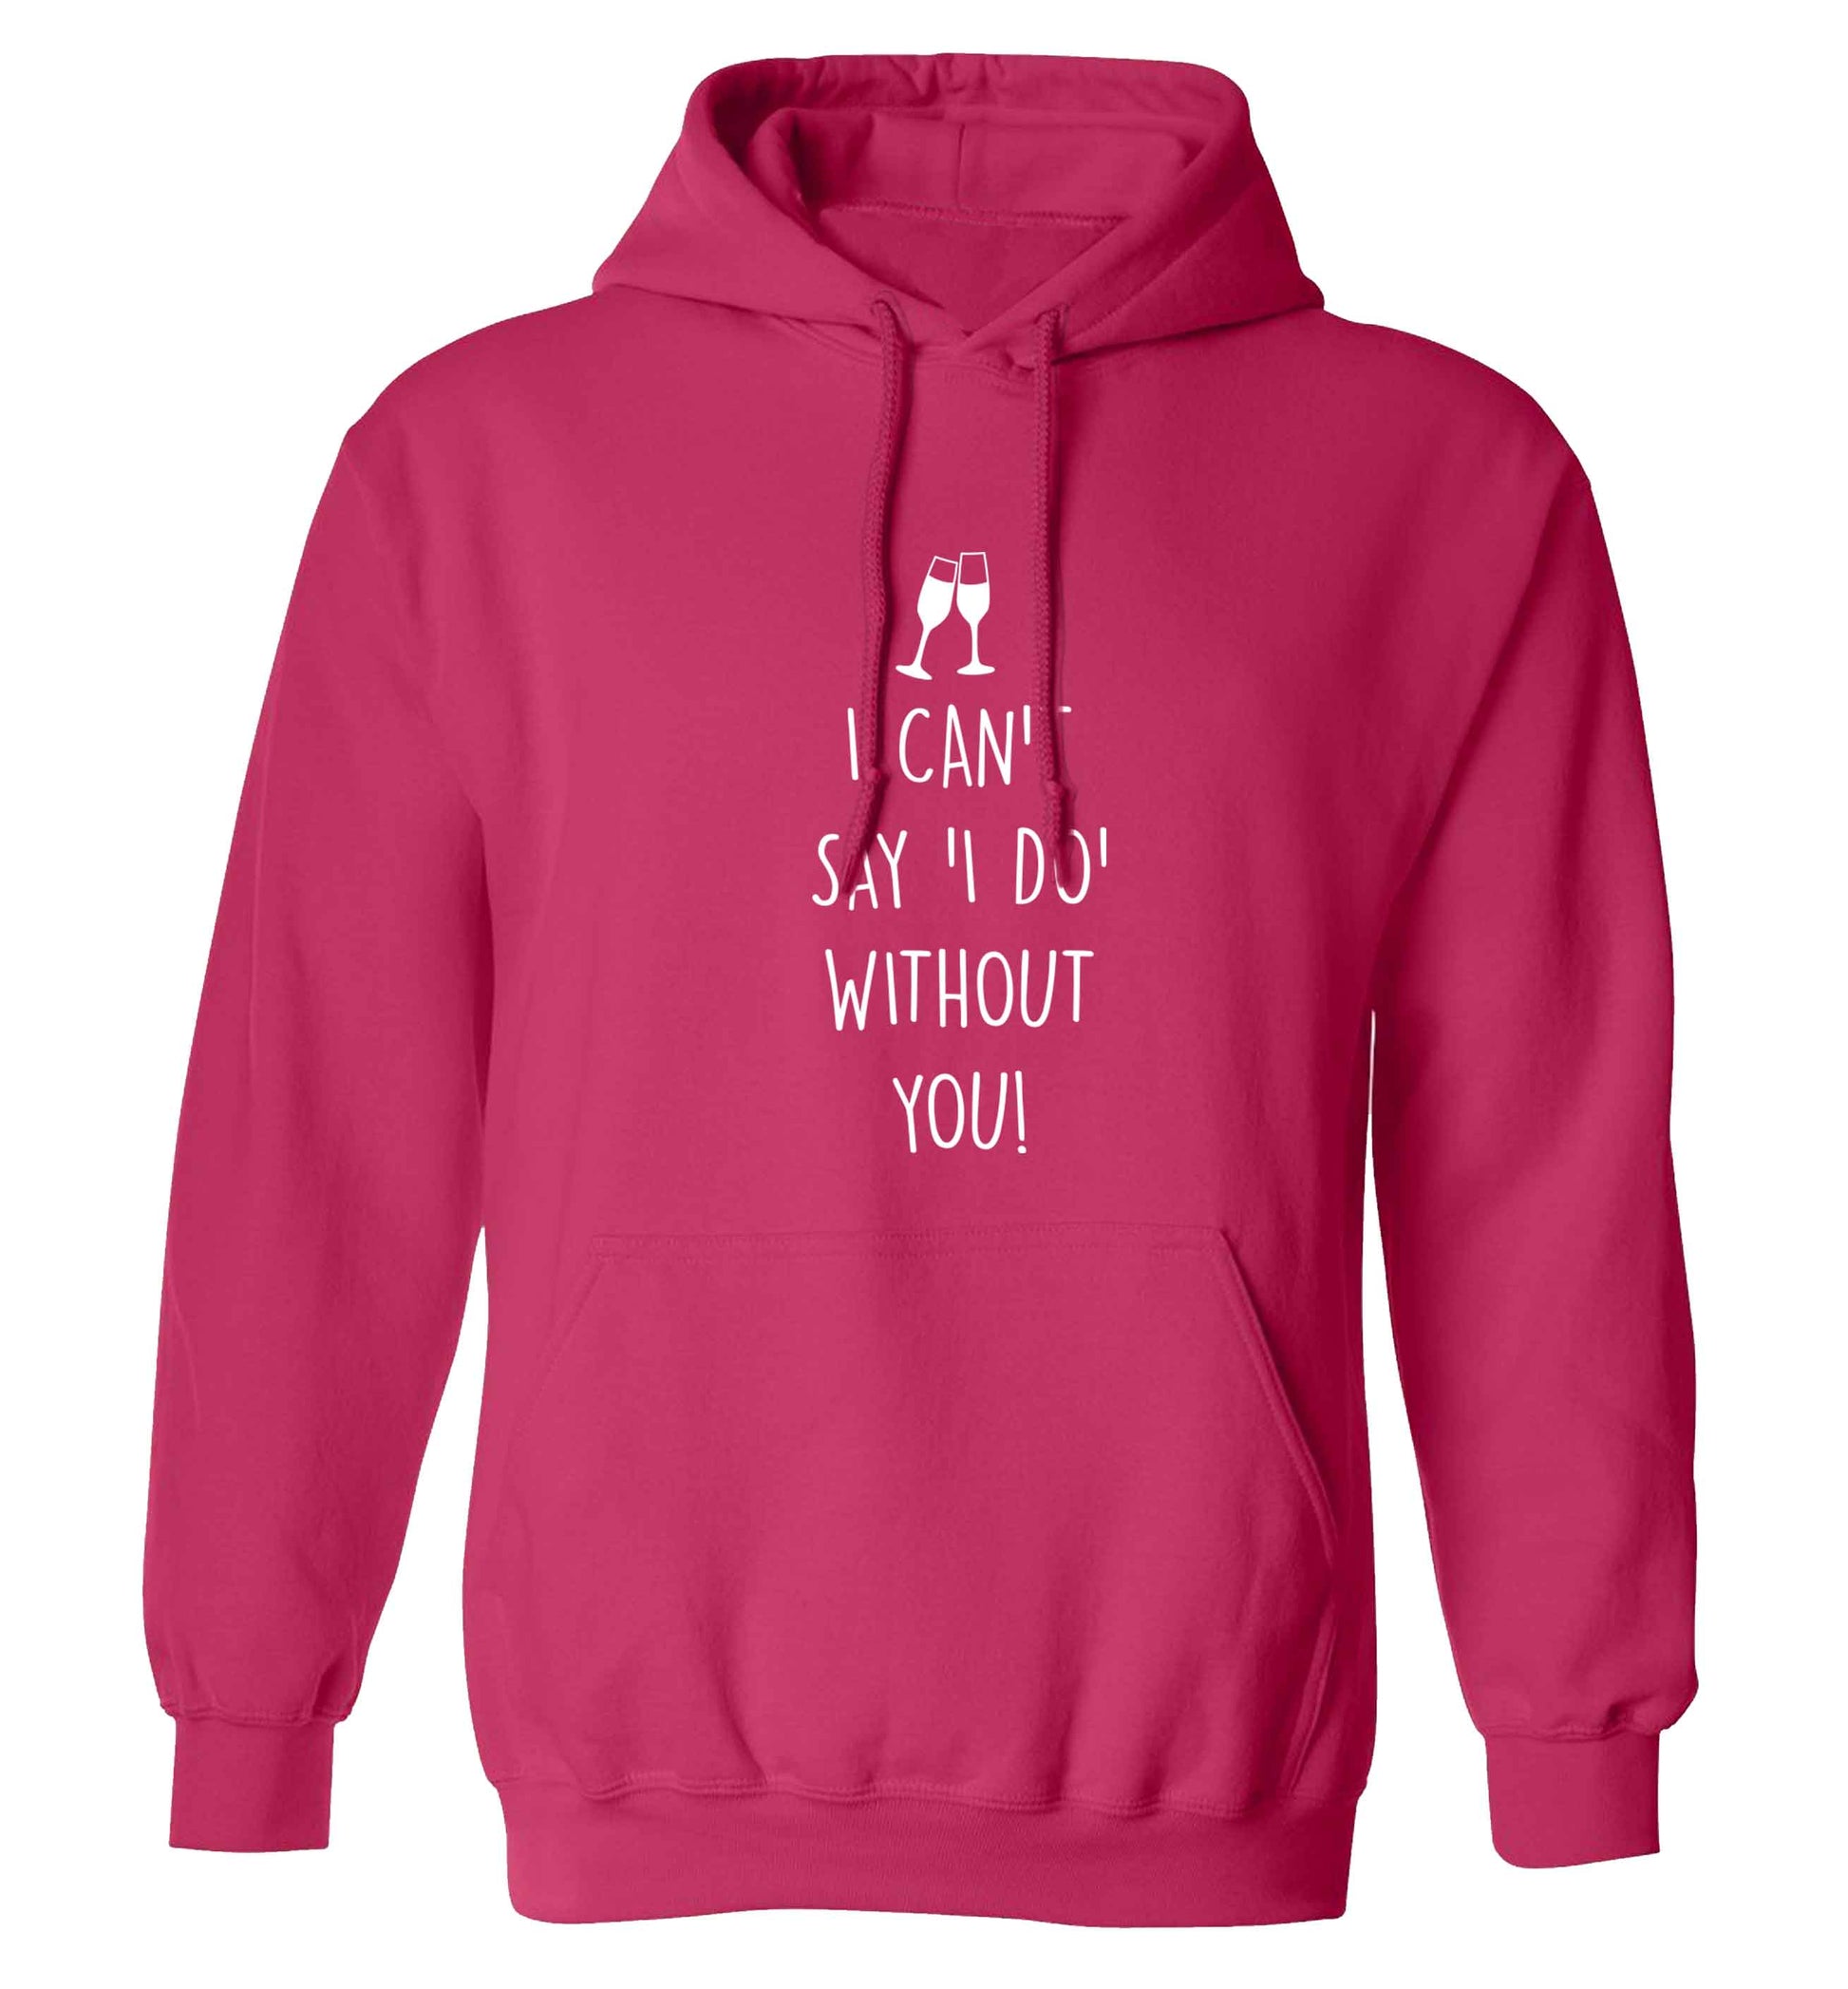 I can't say 'I do' without you! adults unisex pink hoodie 2XL